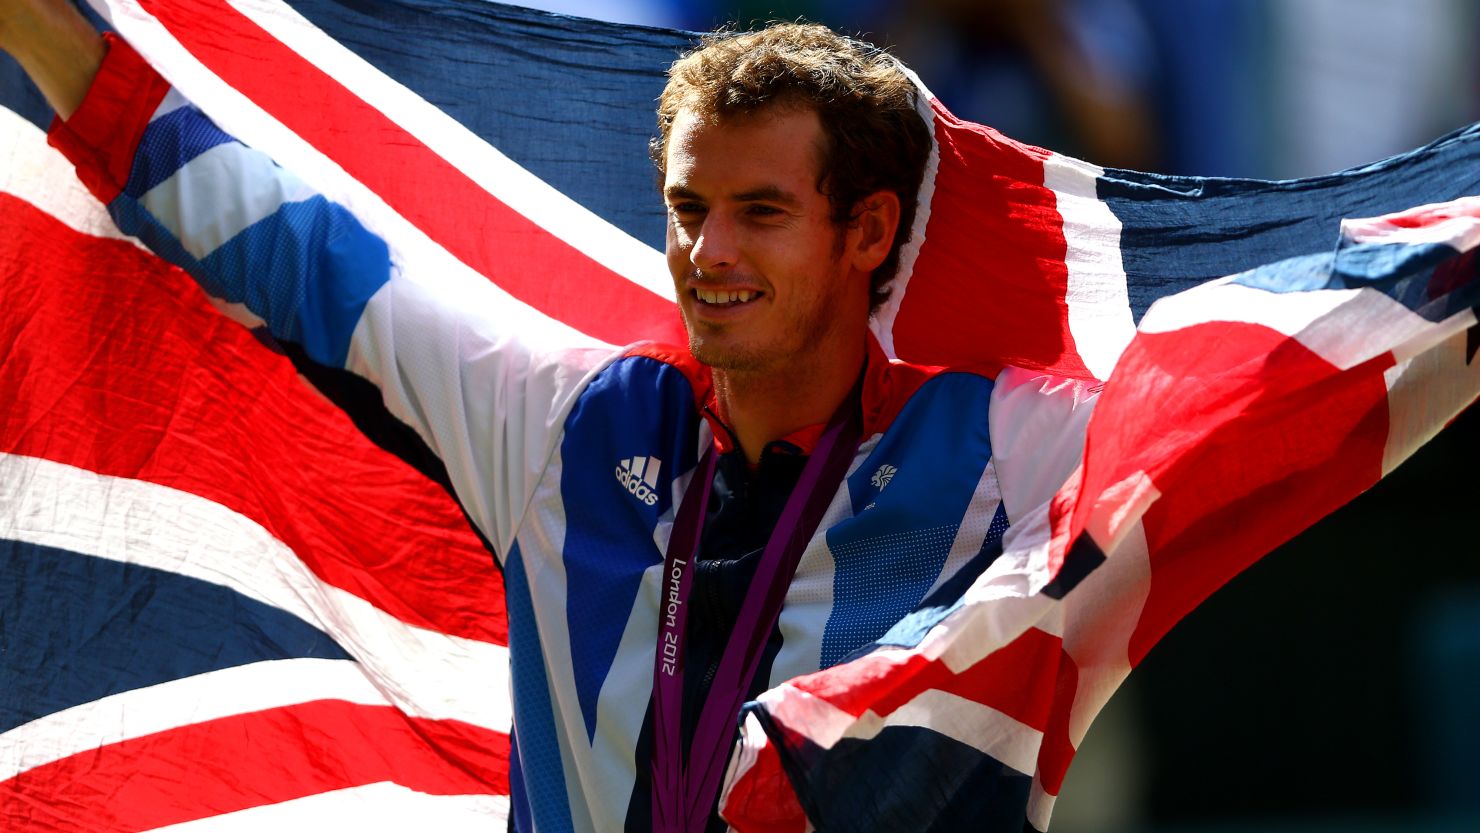 Andy Murray won men's singles gold at London 2012 as well as mixed doubles' silver alongside Laura Robson.